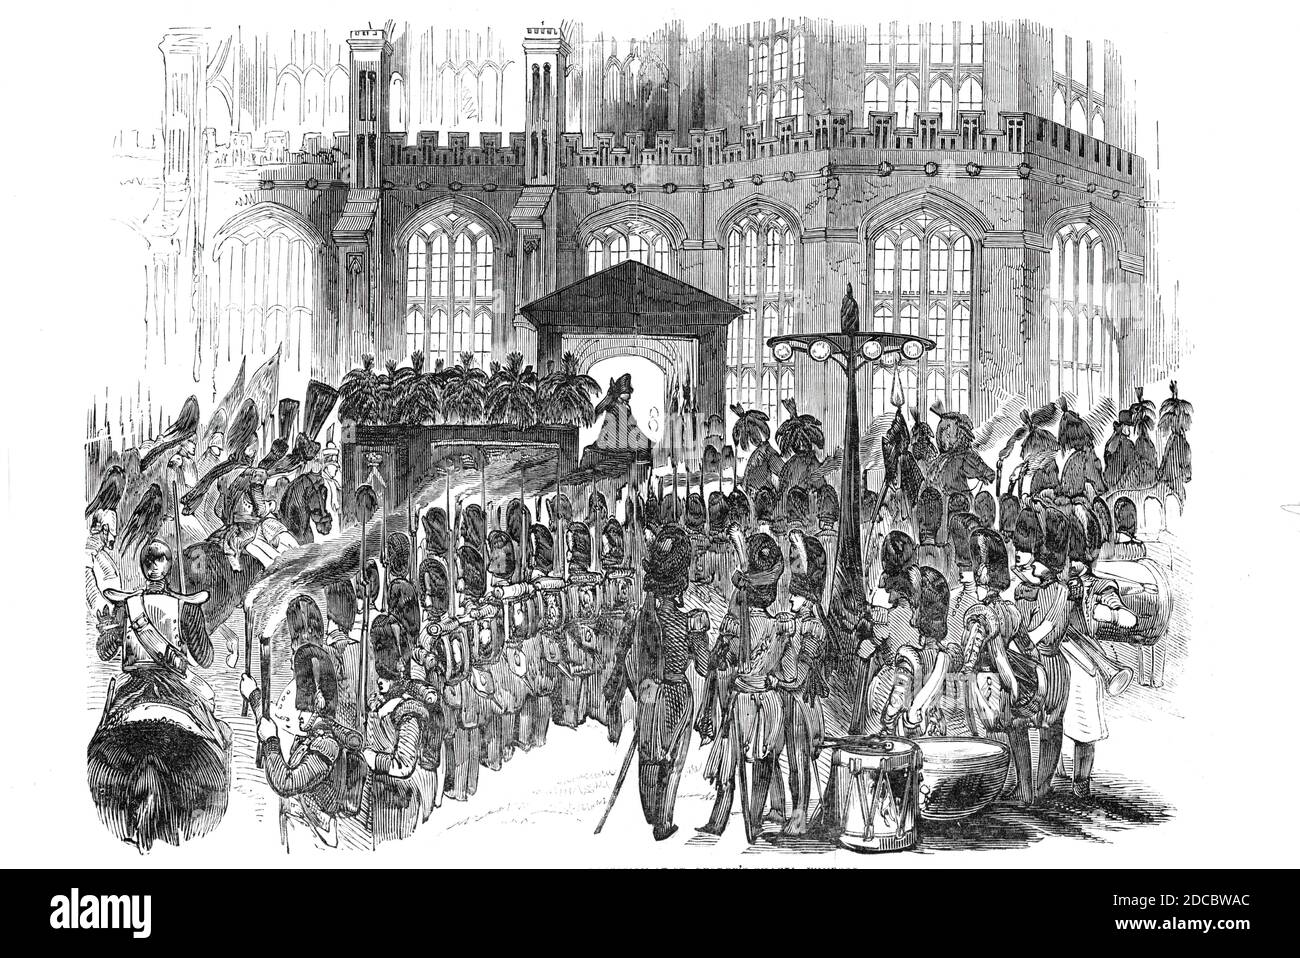 Arrival of the funeral procession at St. George's Chapel, Windsor, December 1844. Mourners follow the hearse containing the body of Princess Sophia of Gloucester, great-granddaughter of King George II. 'A temporary porch was erected in the Castle yard, at the south door, where the procession entered the chapel, and this as well as every other portion of the fittings was hung with black cloth...A company of the second battalion of the Scotch Fusilier Guards, under Colonel Moncrieffe, were drawn up within the Castle yard, in double lines, extending from Henry the Eighth's gateway, to the entranc Stock Photo